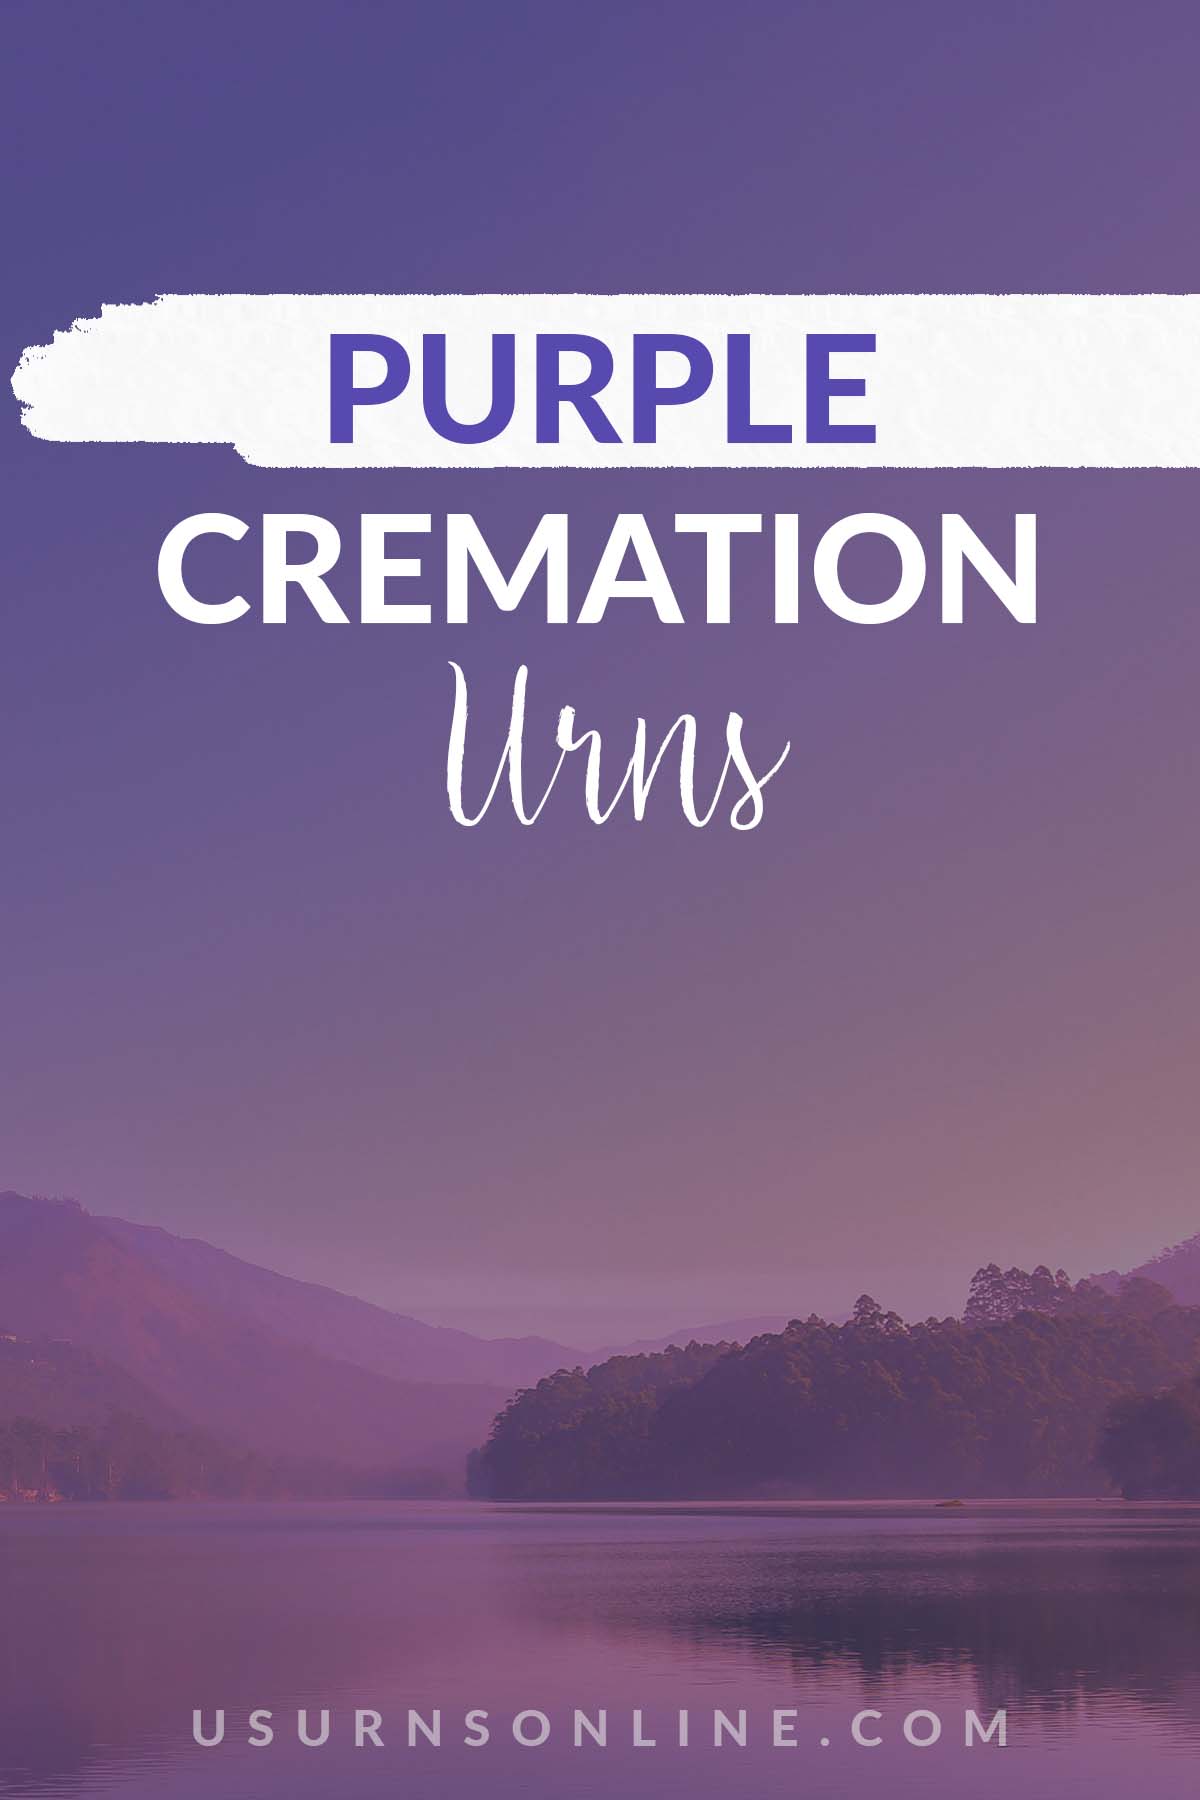 Purple cremation urns - feature image